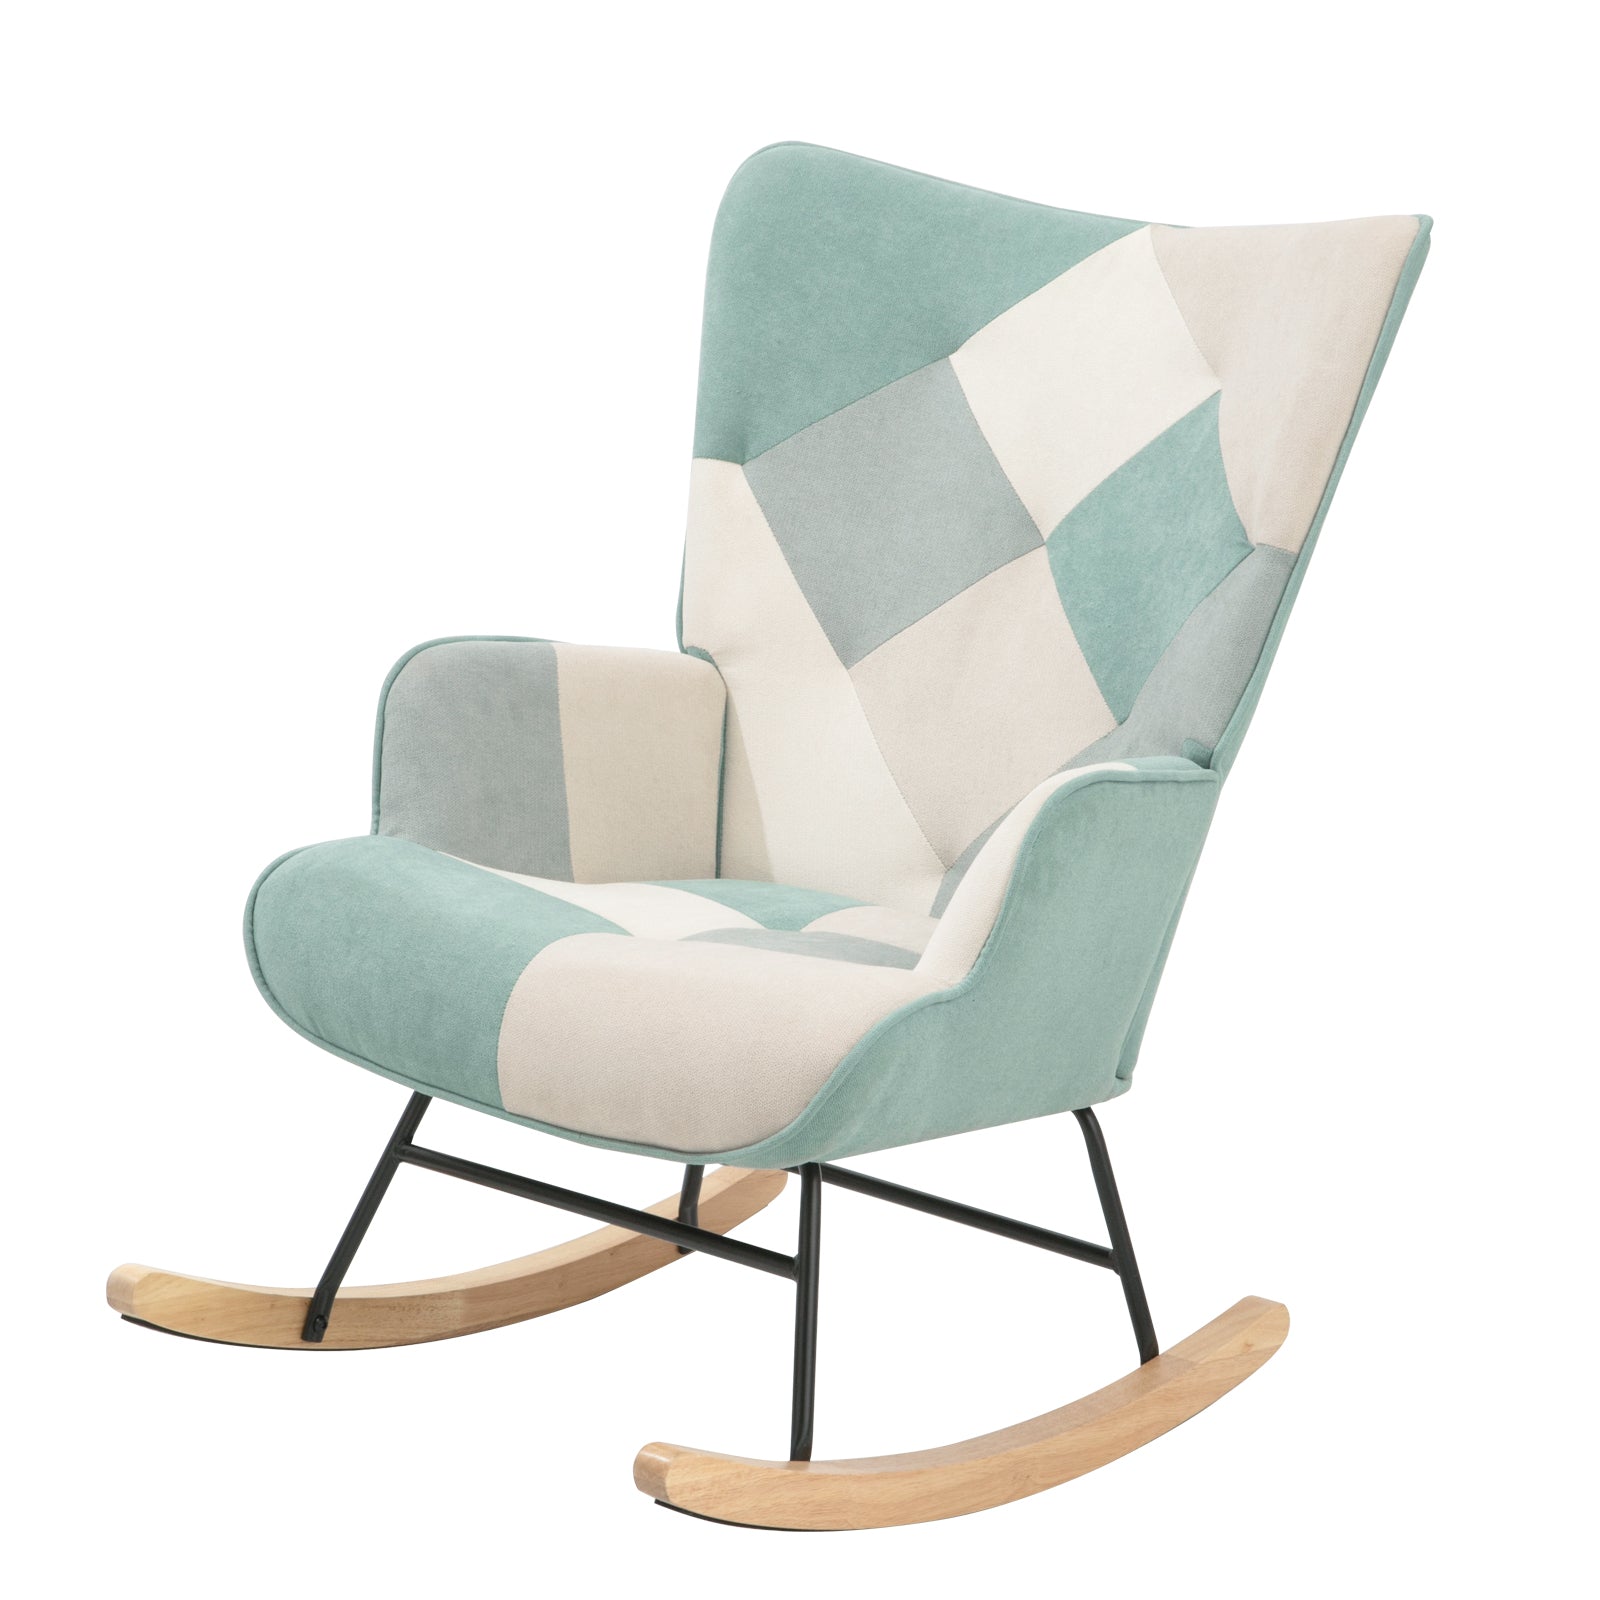 ZNTS Rocking Chair, Mid Century Fabric Rocker Chair with Wood Legs and Patchwork Linen for Livingroom W109543644